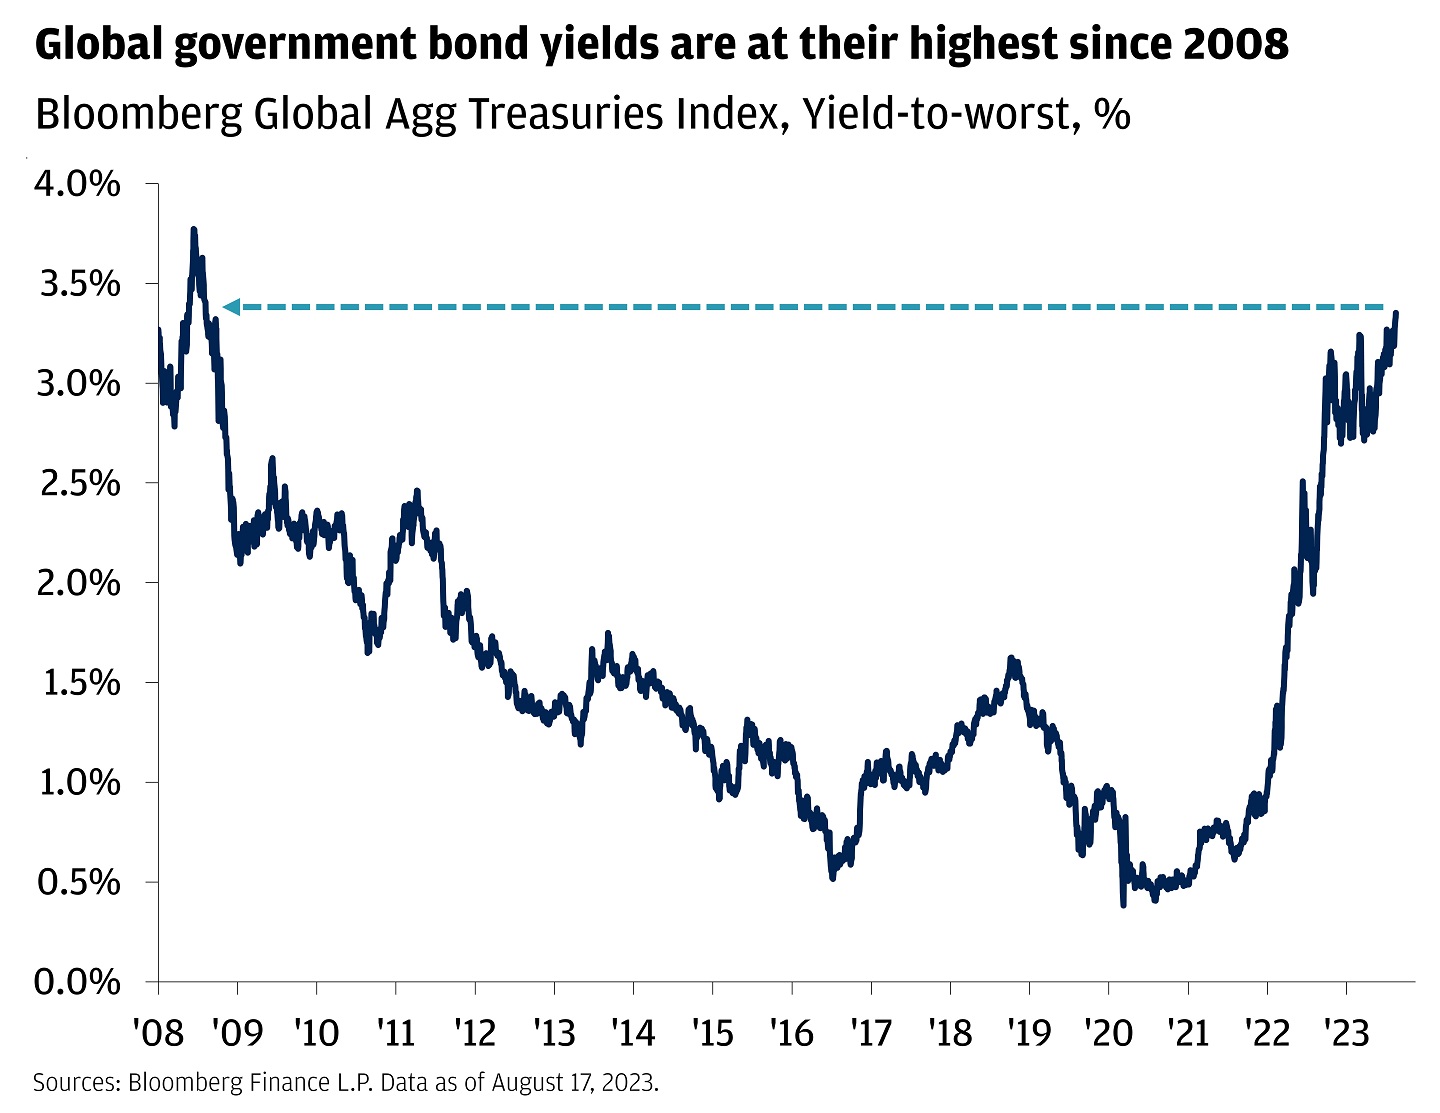 This chart shows bond yields measured by the Bloomberg Global Aggregate Treasuries index from 2008 through 2023.